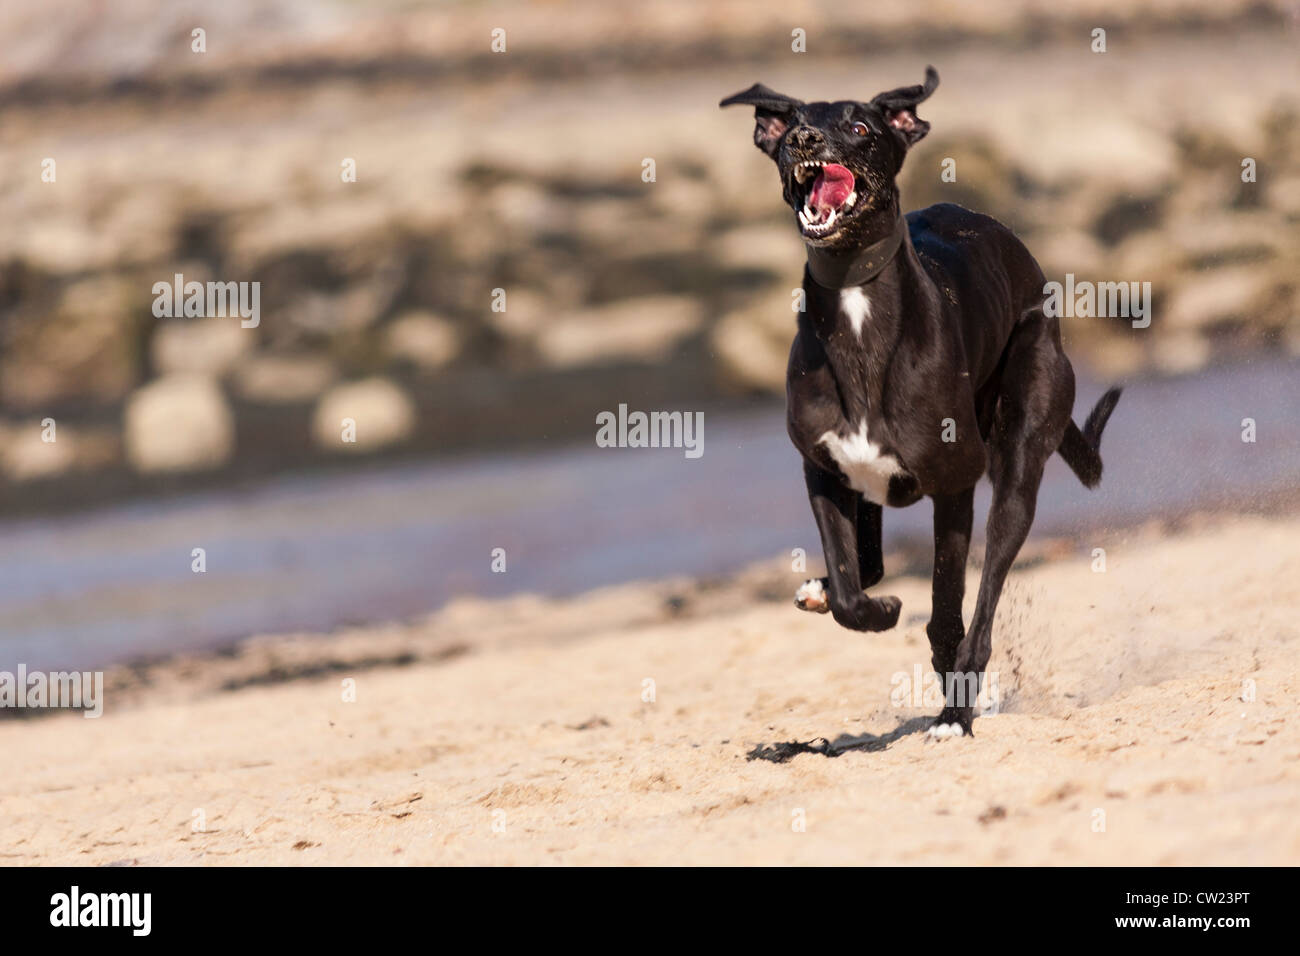 A fast dog running on the sand. Stock Photo